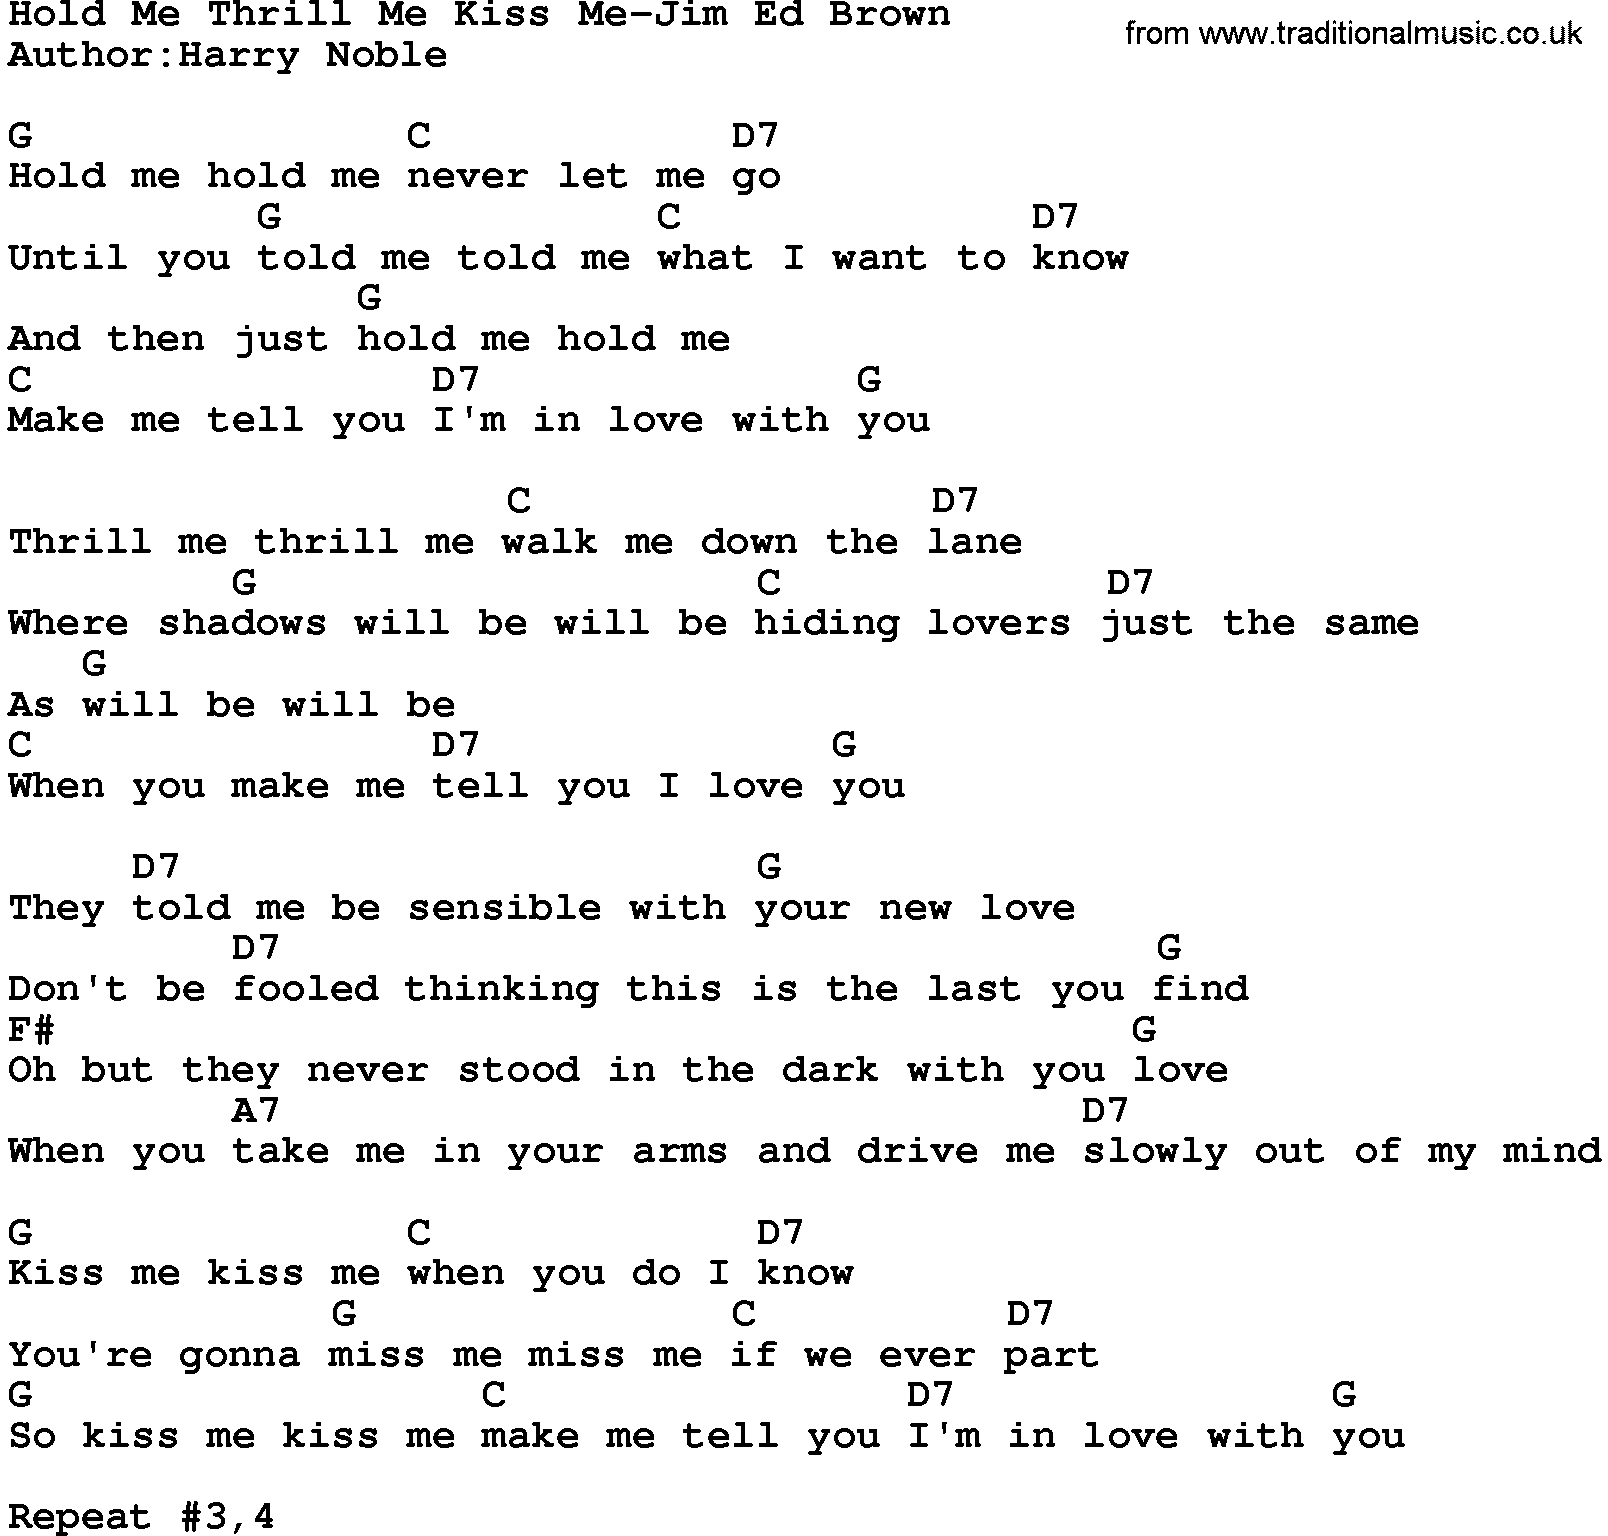 Country music song: Hold Me Thrill Me Kiss Me-Jim Ed Brown lyrics and chords